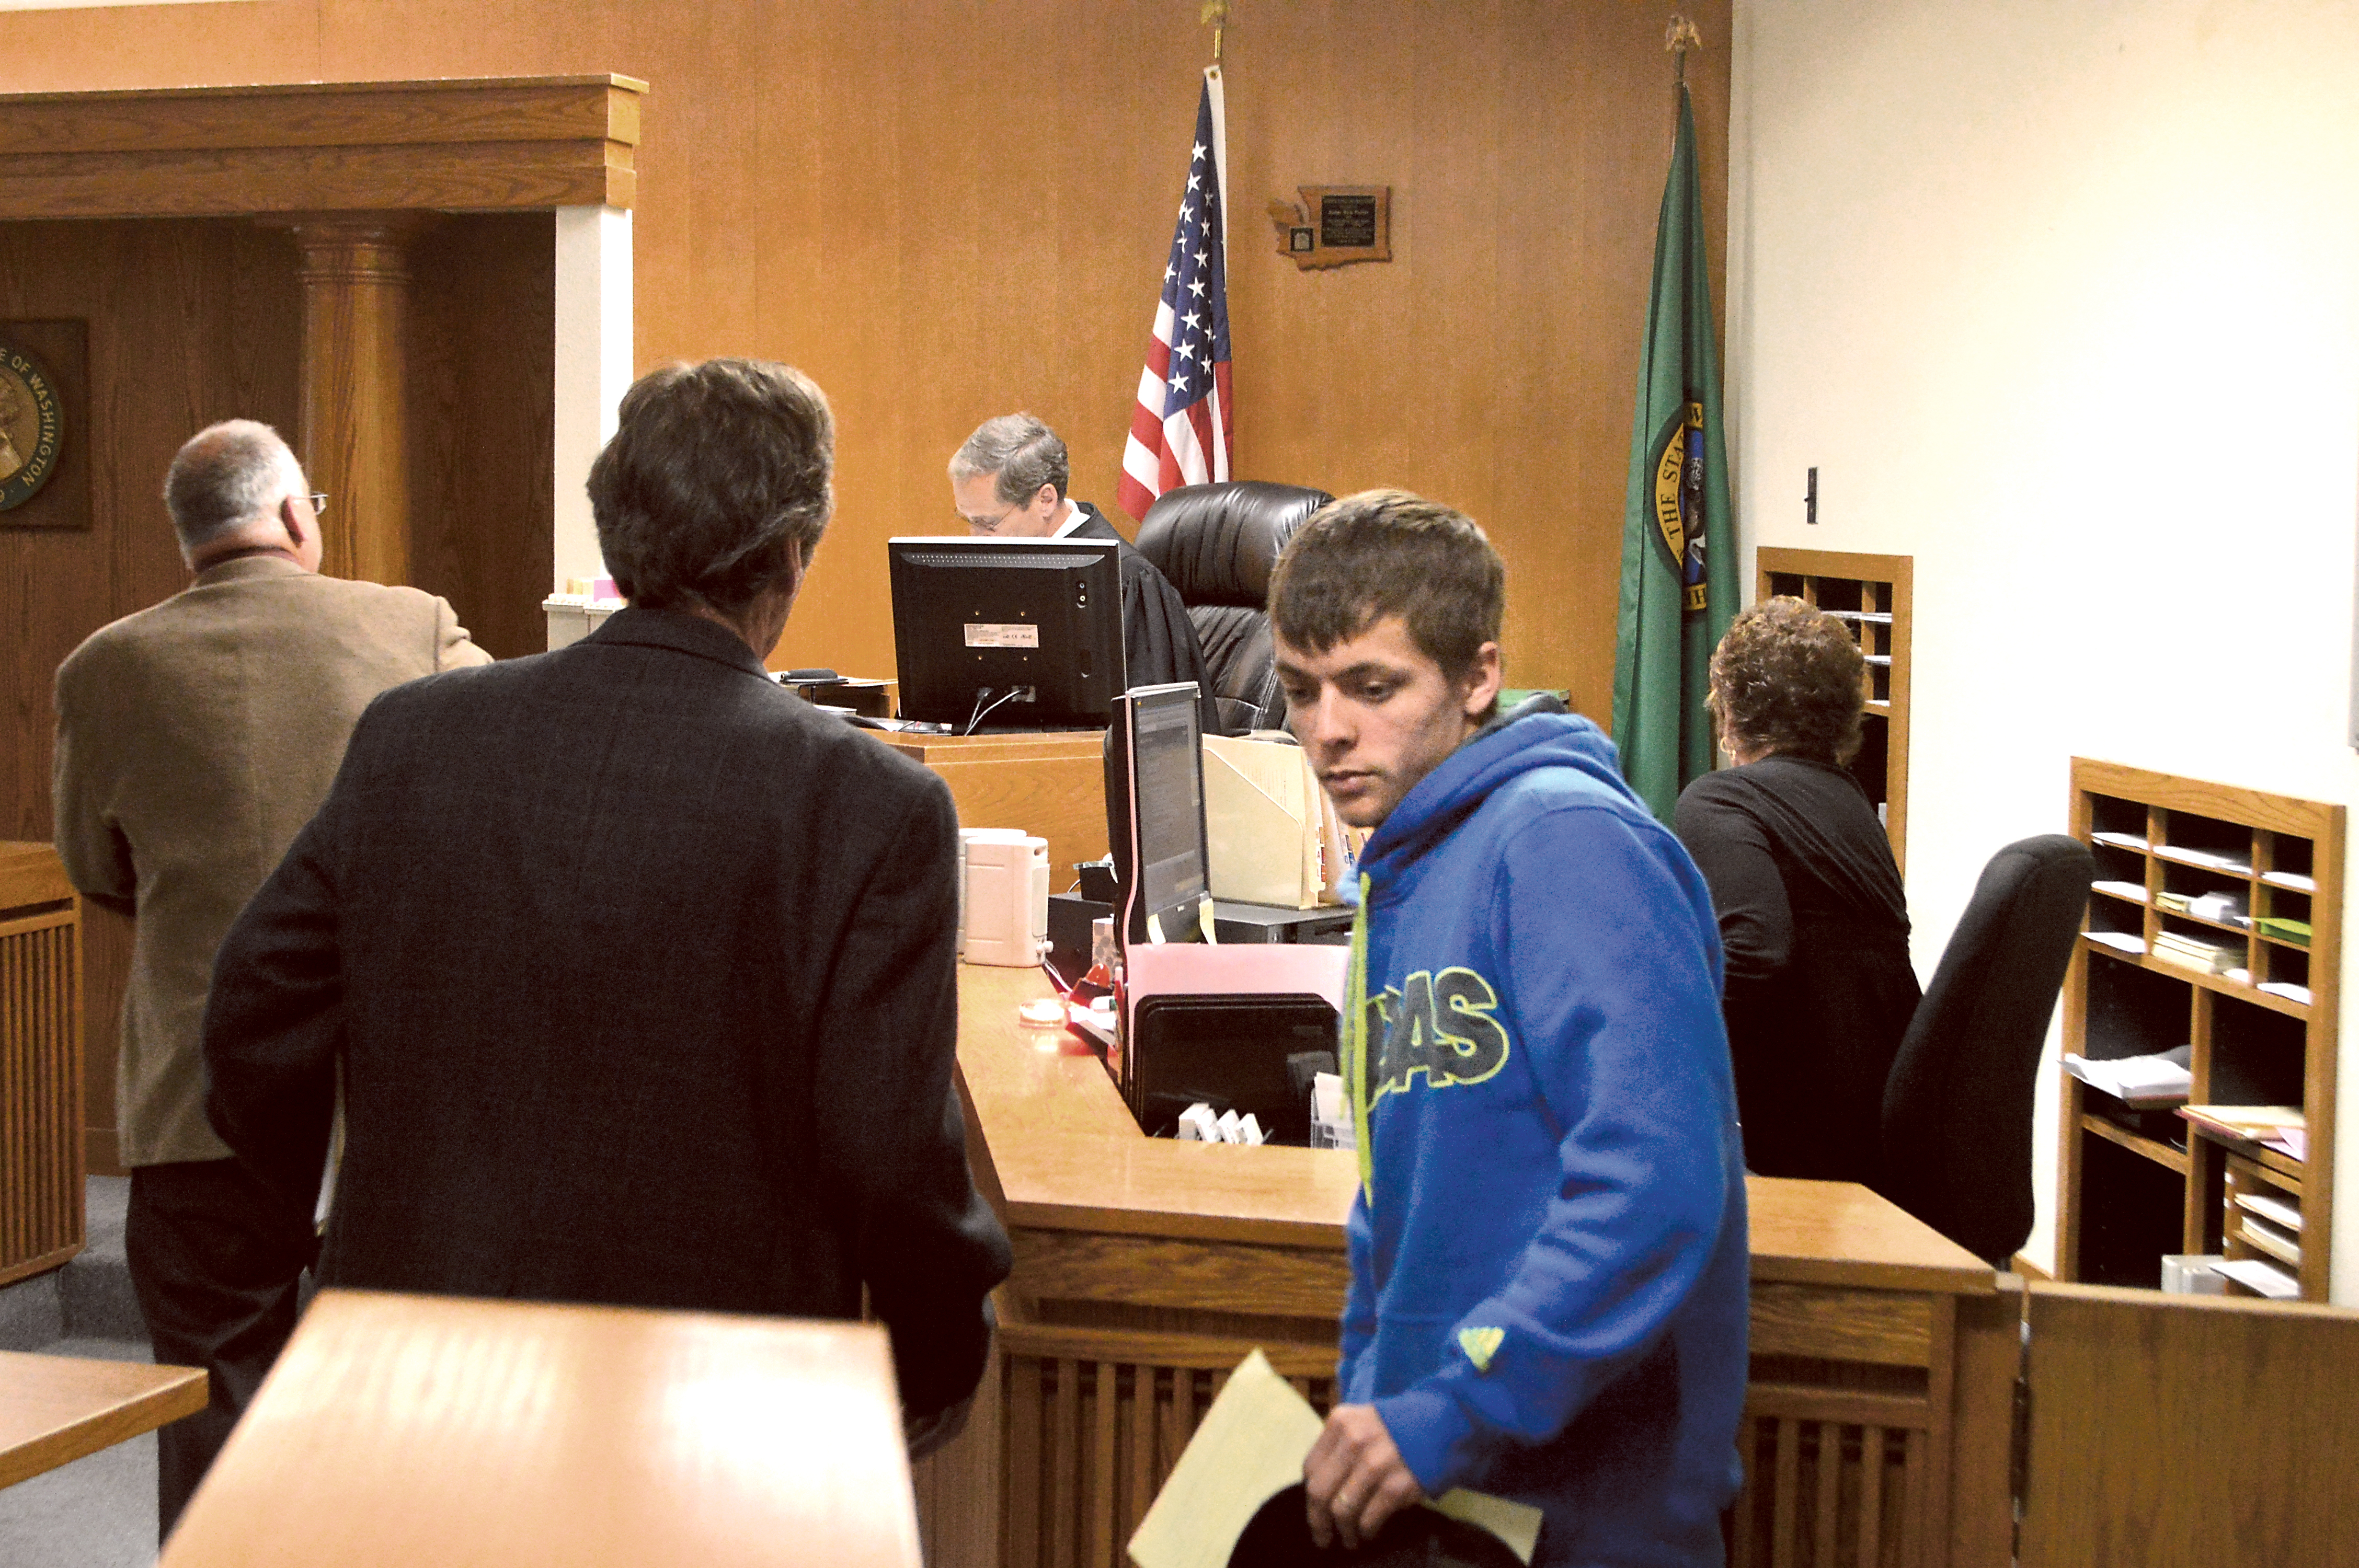 Jason Holden leaves the Clallam County District Court bench Thursday after being charged with disorderly conduct for a staged kidnapping on April 13 in Sequim's Carrie Blake Park. Joe Smillie/Peninsula Daily News